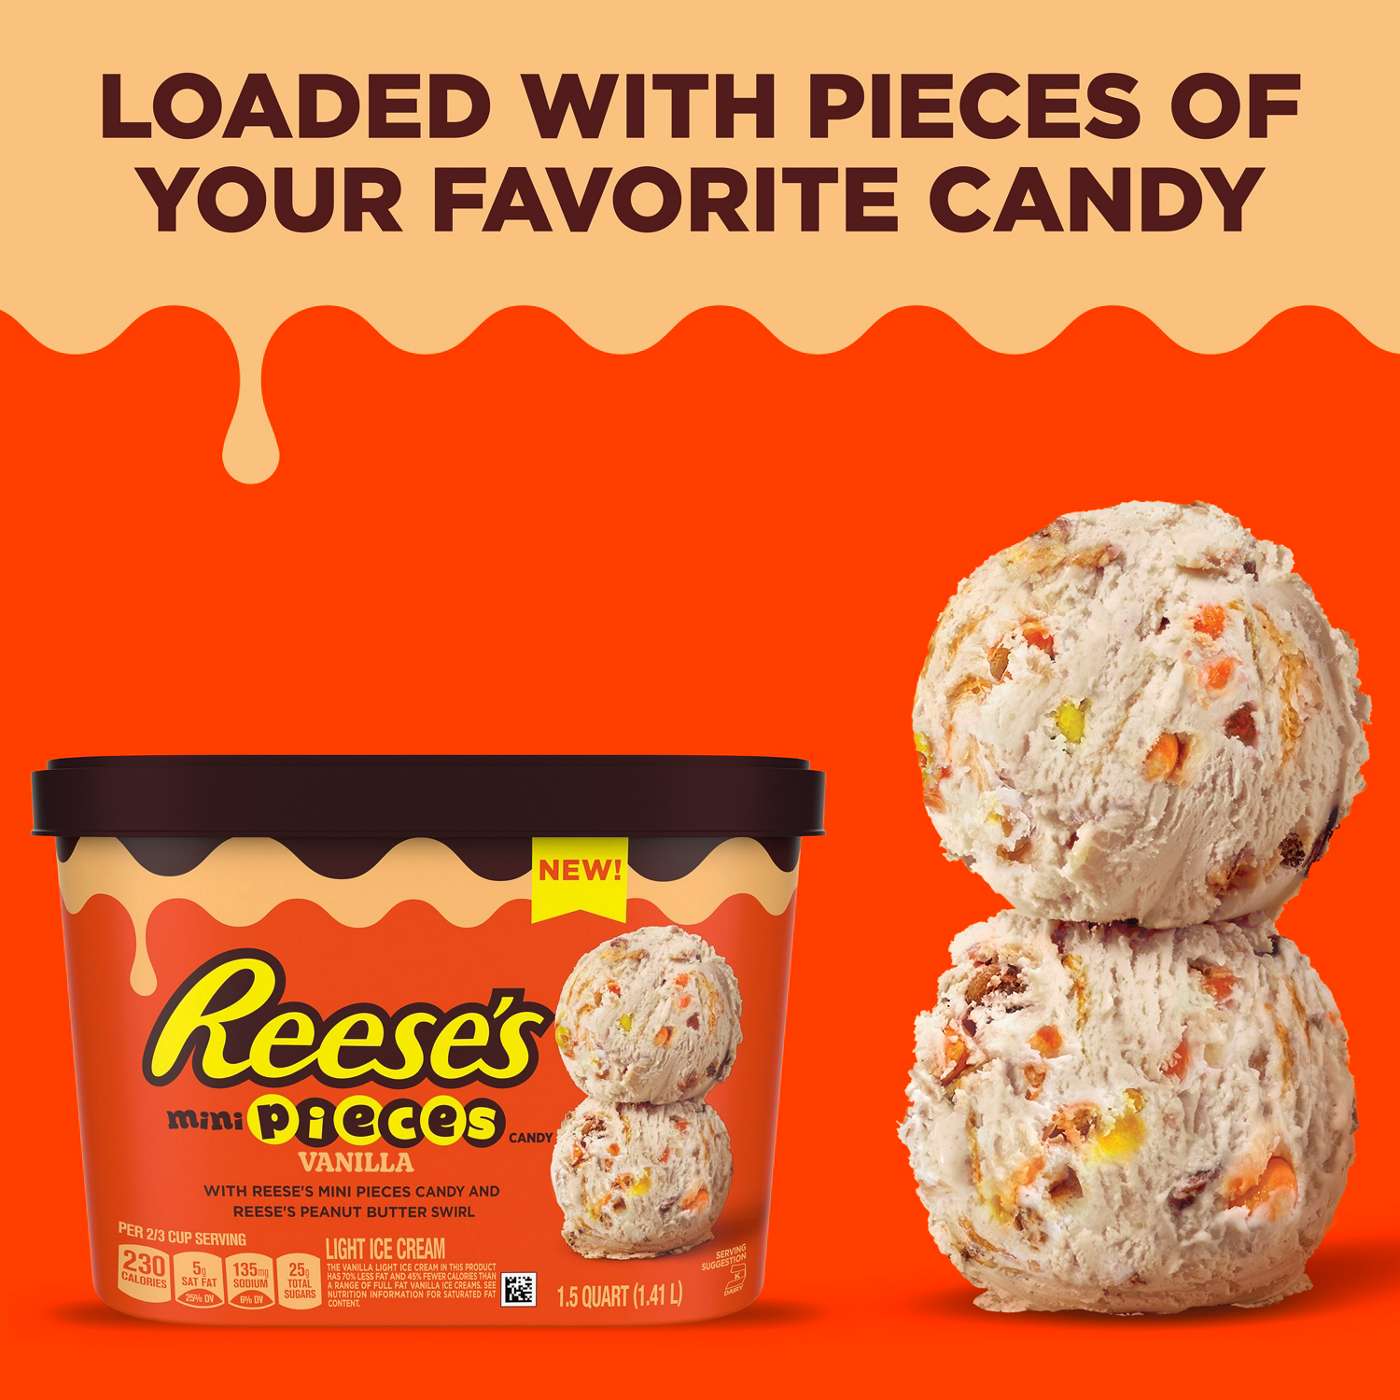 Reese's Vanilla Light Ice Cream with Mini Reese's Pieces and Peanut Butter Swirl; image 3 of 8